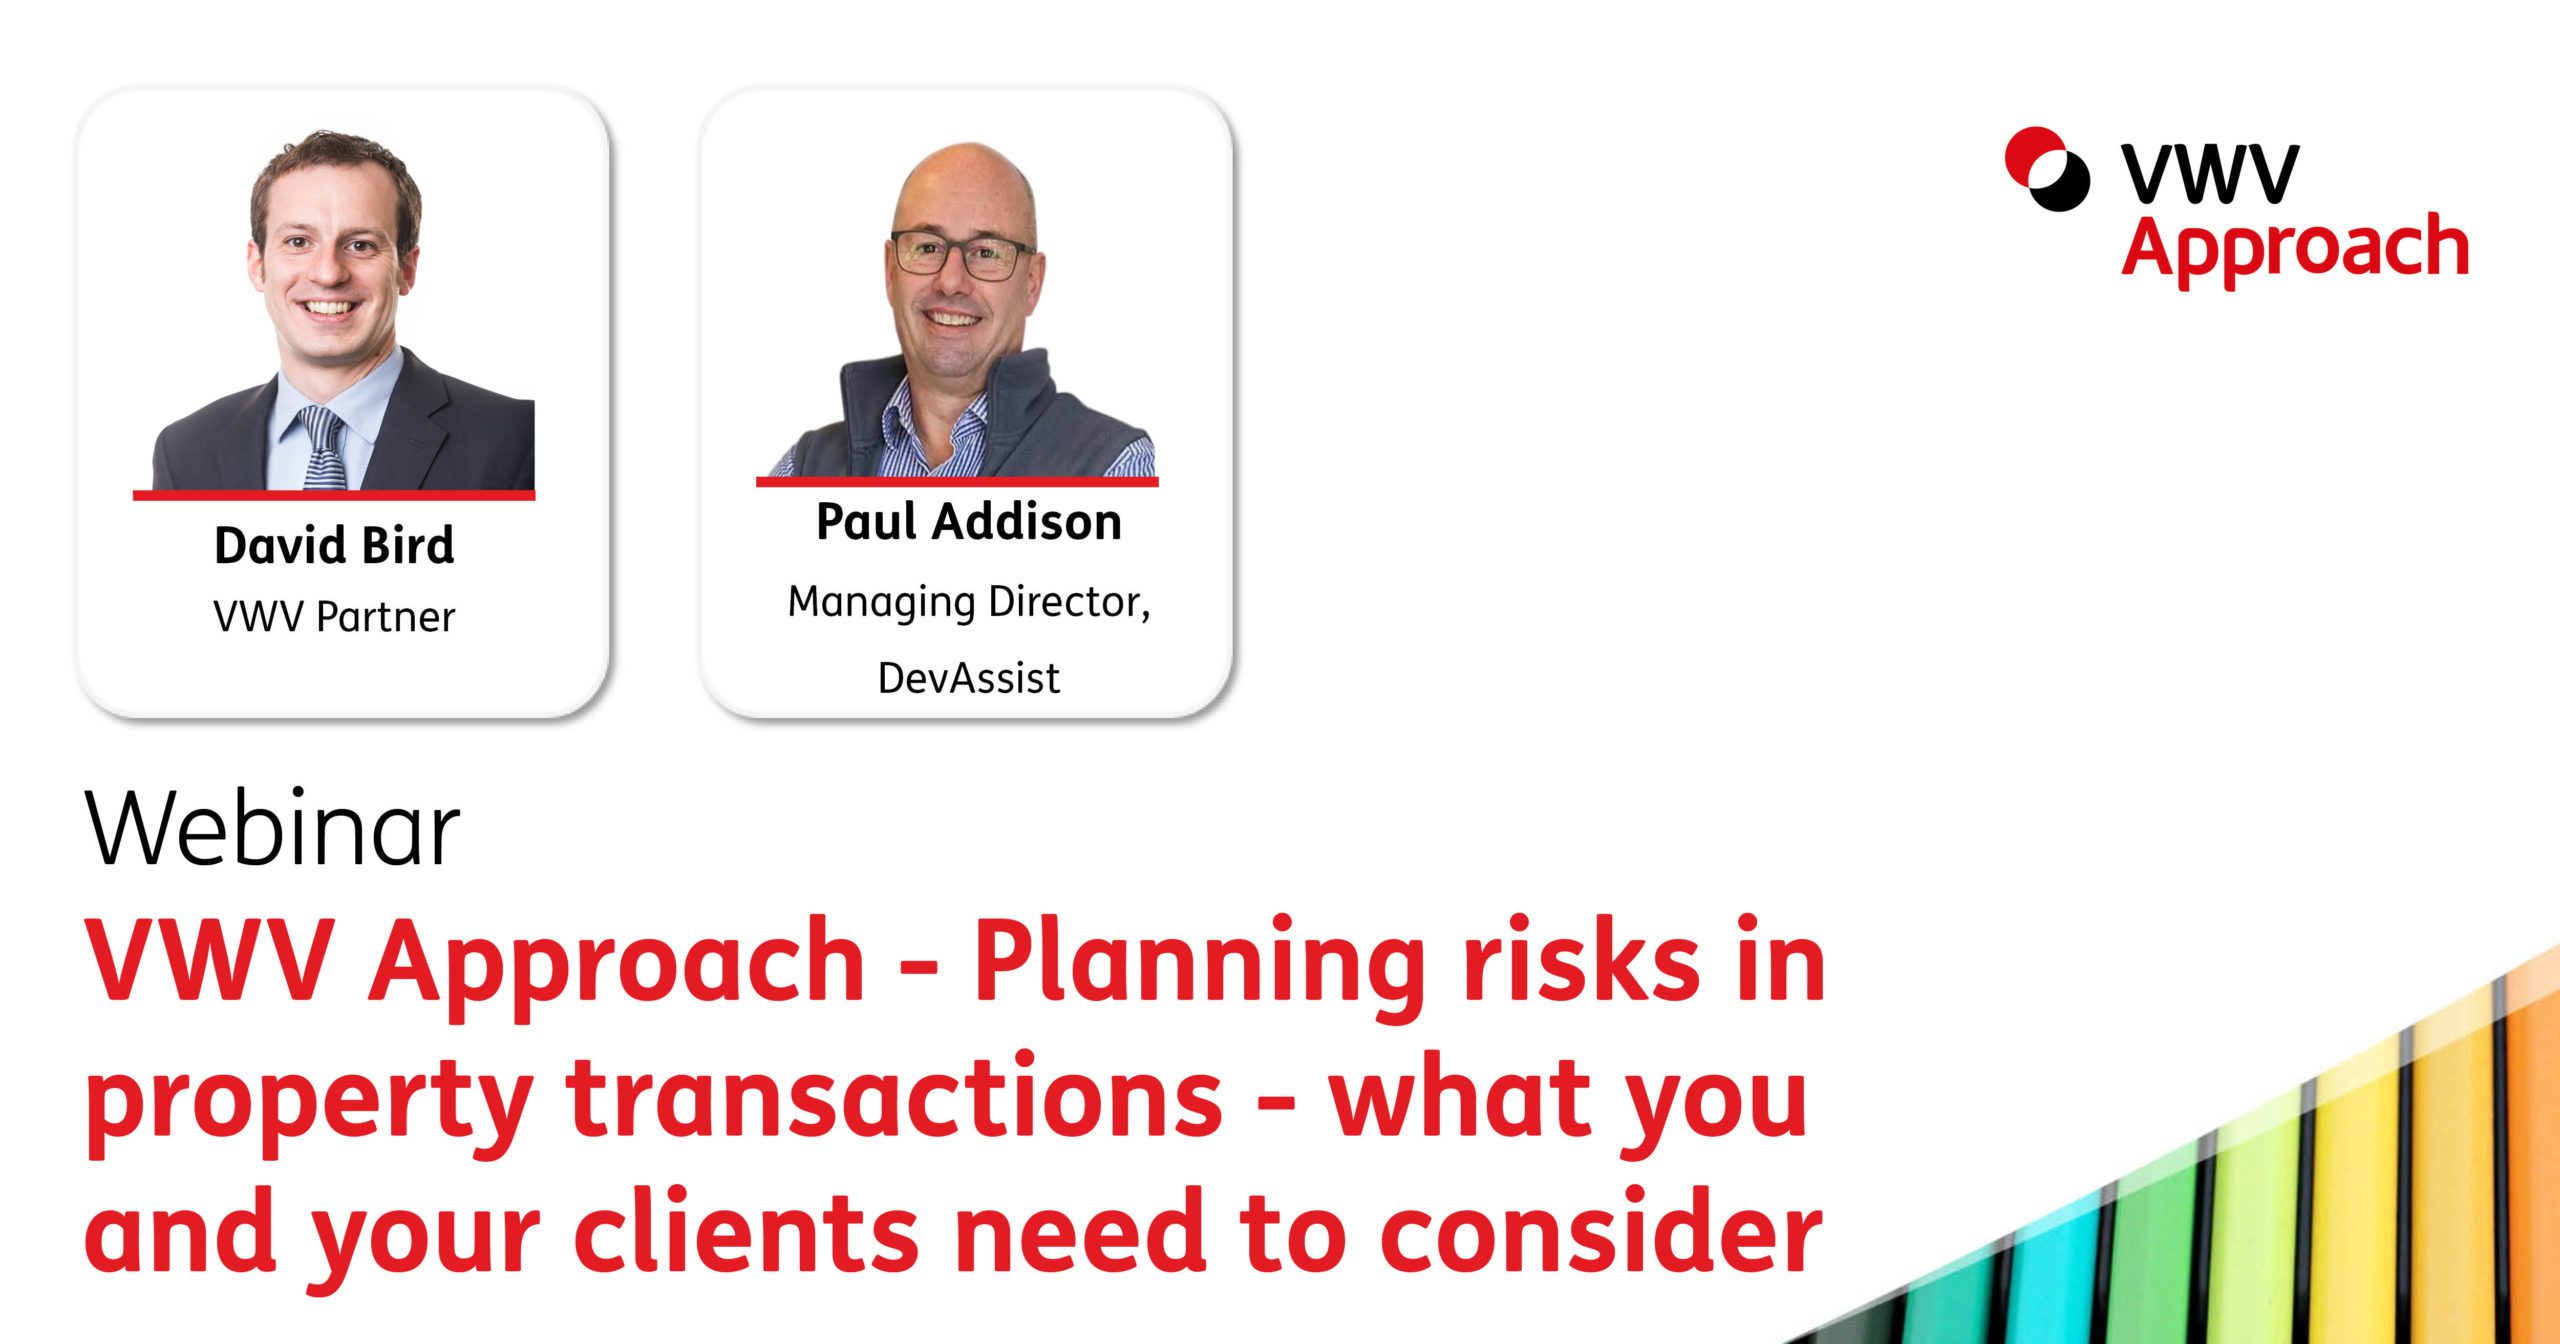 Planning risks in property transactions